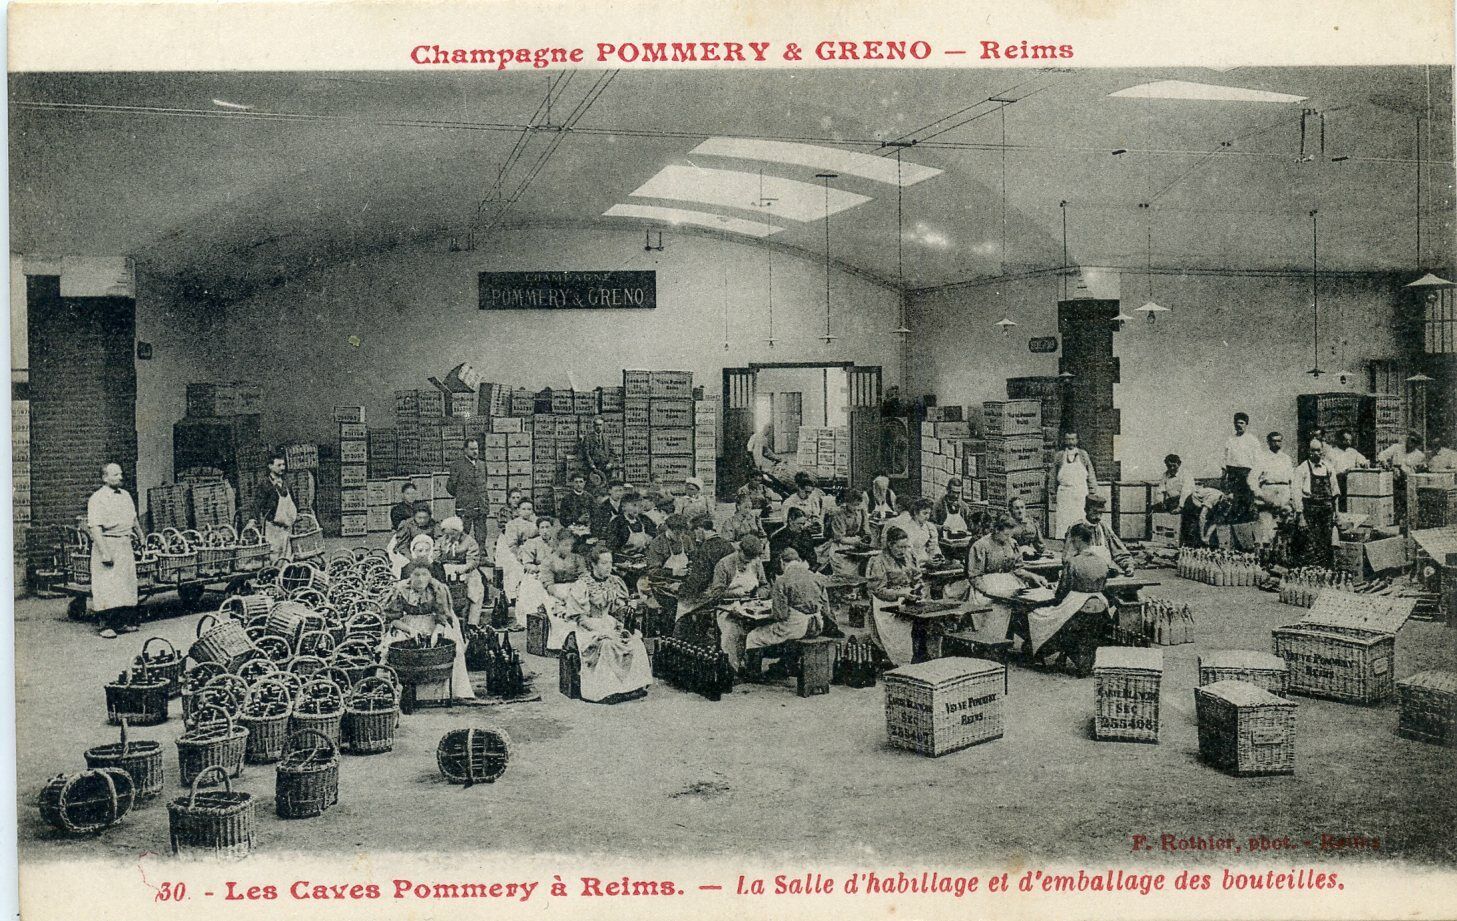 CPA // CHAMPAGNE POMMERY & GRENO REIMS // THE DRESSING AND PACKAGING ROOM